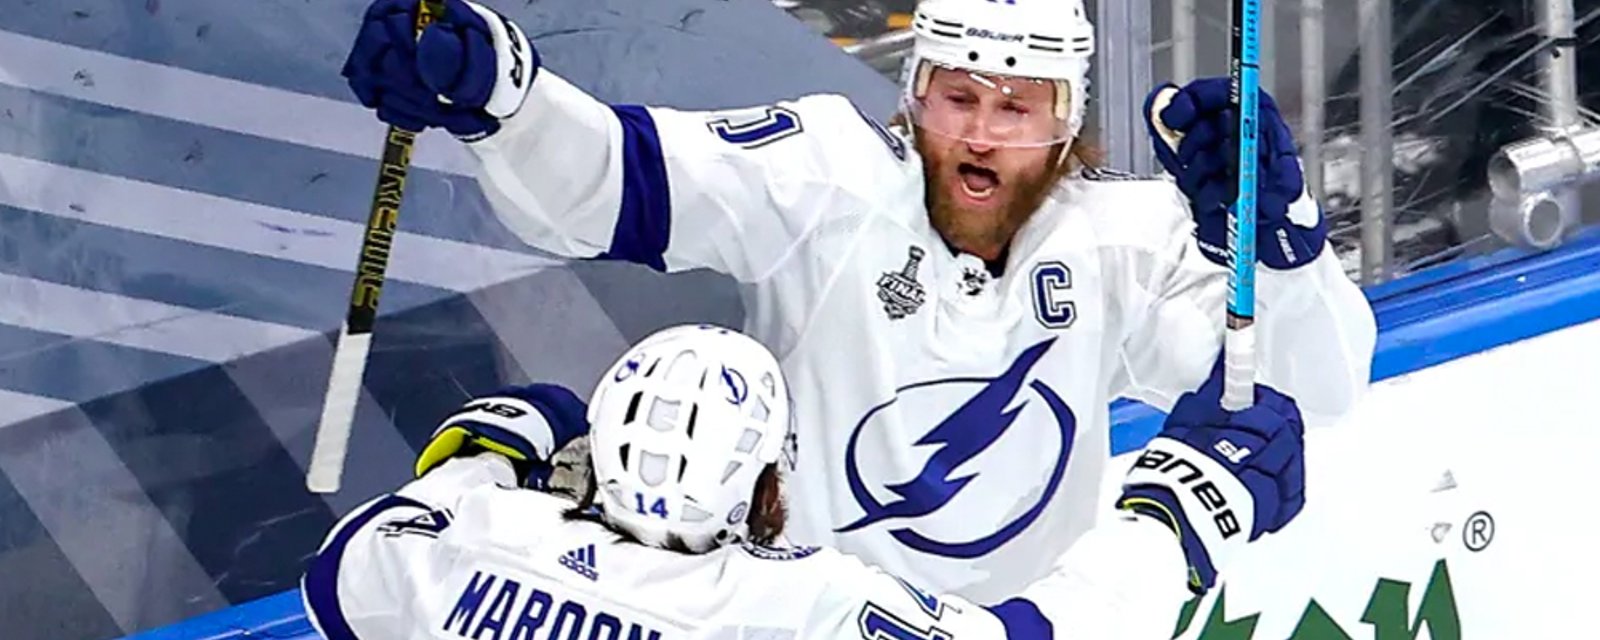 Stamkos breaks an 80 year old record with his incredible return last night